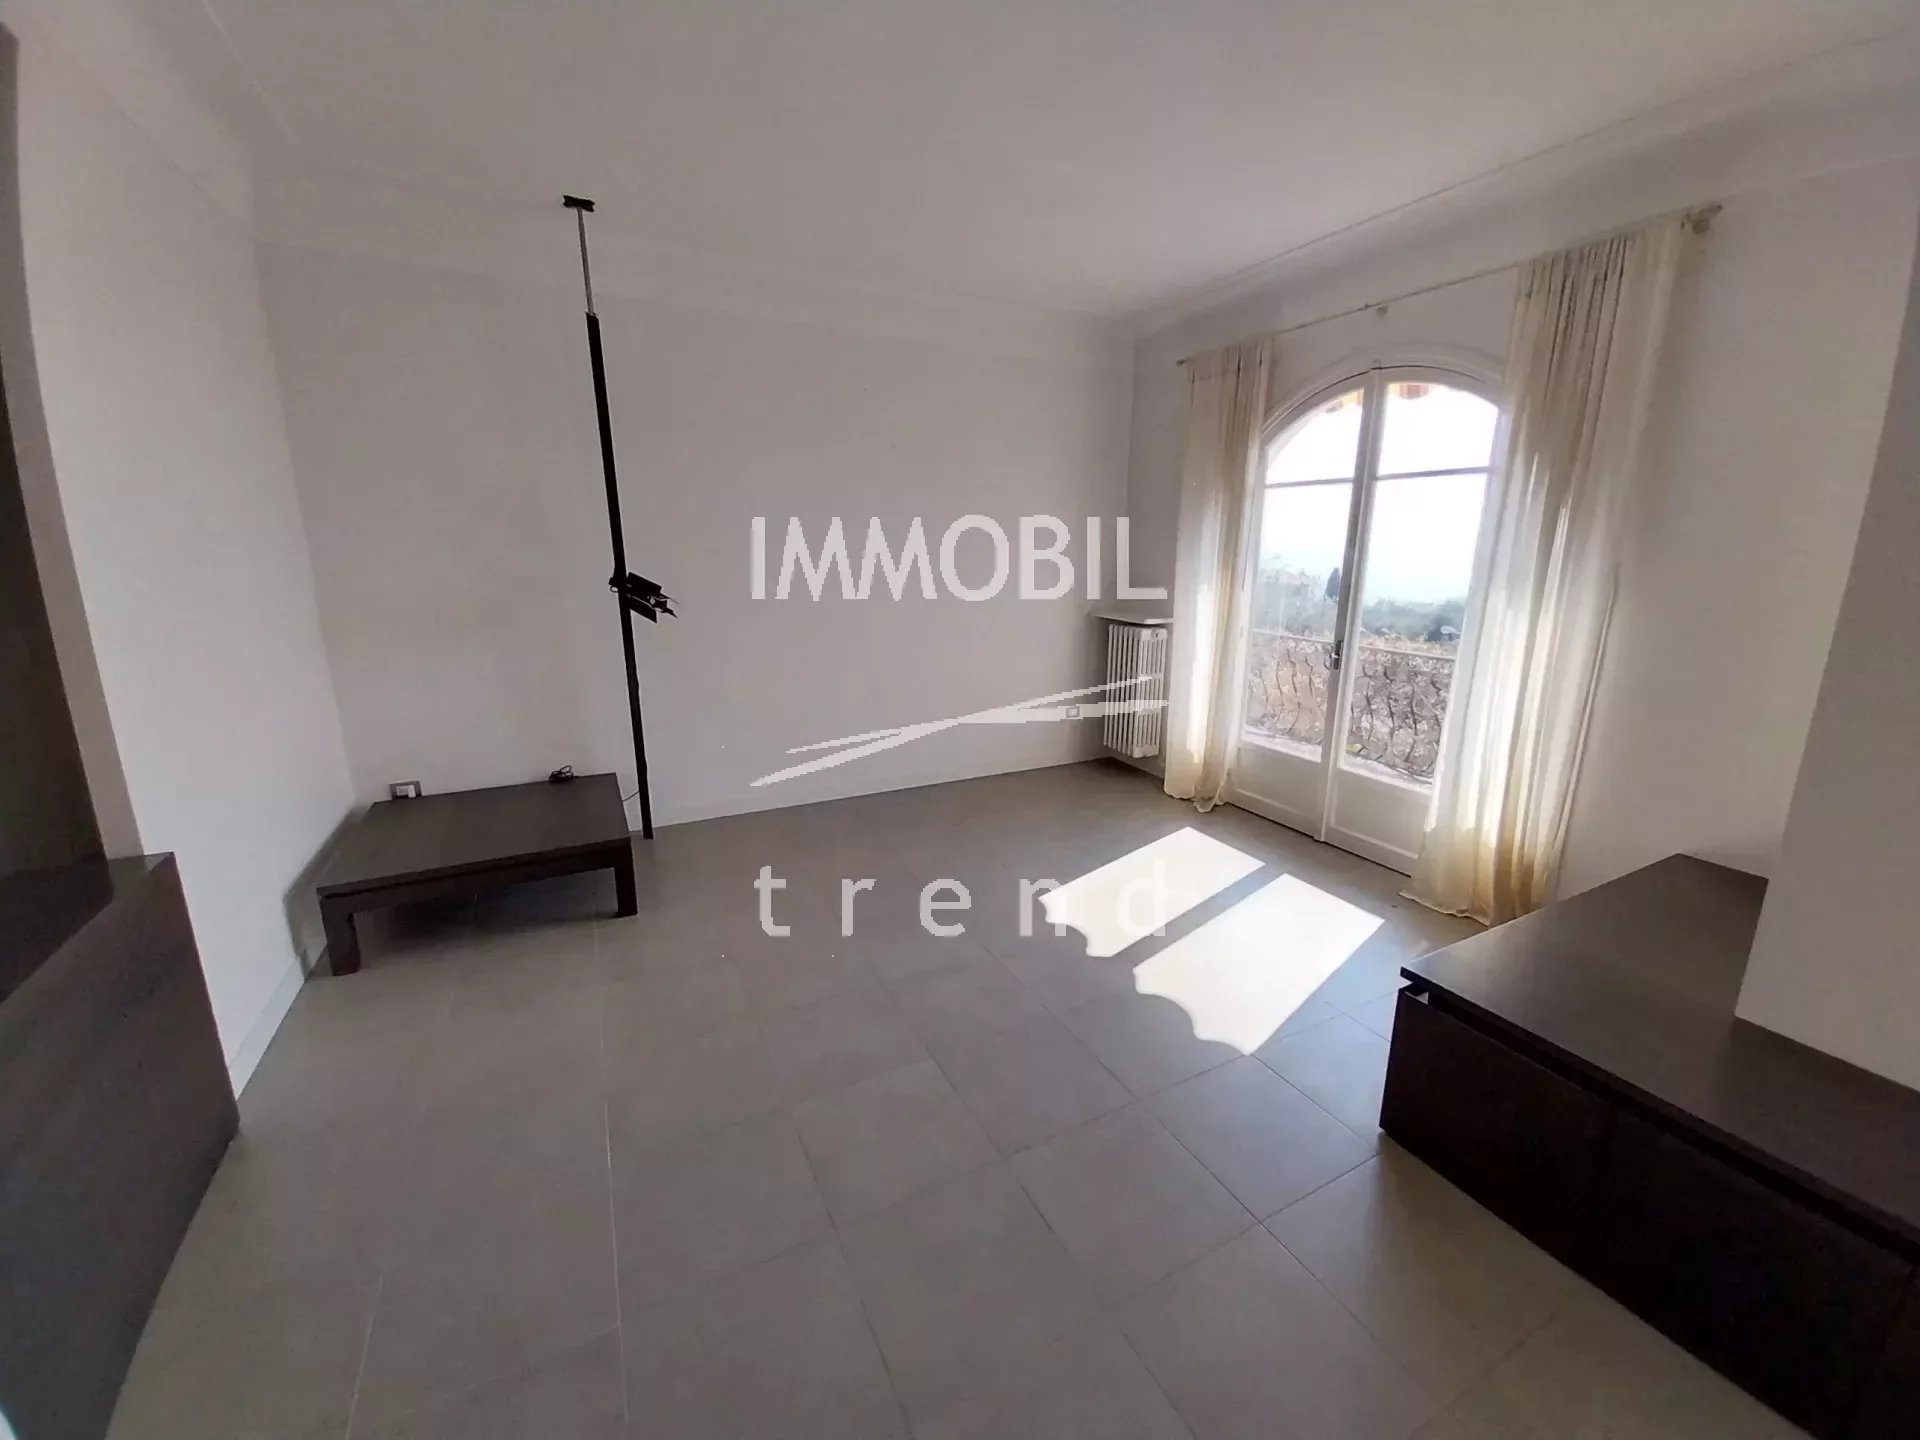 SOLE AGENCY ! Real Estate Menton - For sale, two bedroom apartment with terrace, garage, private garden and panoramic view